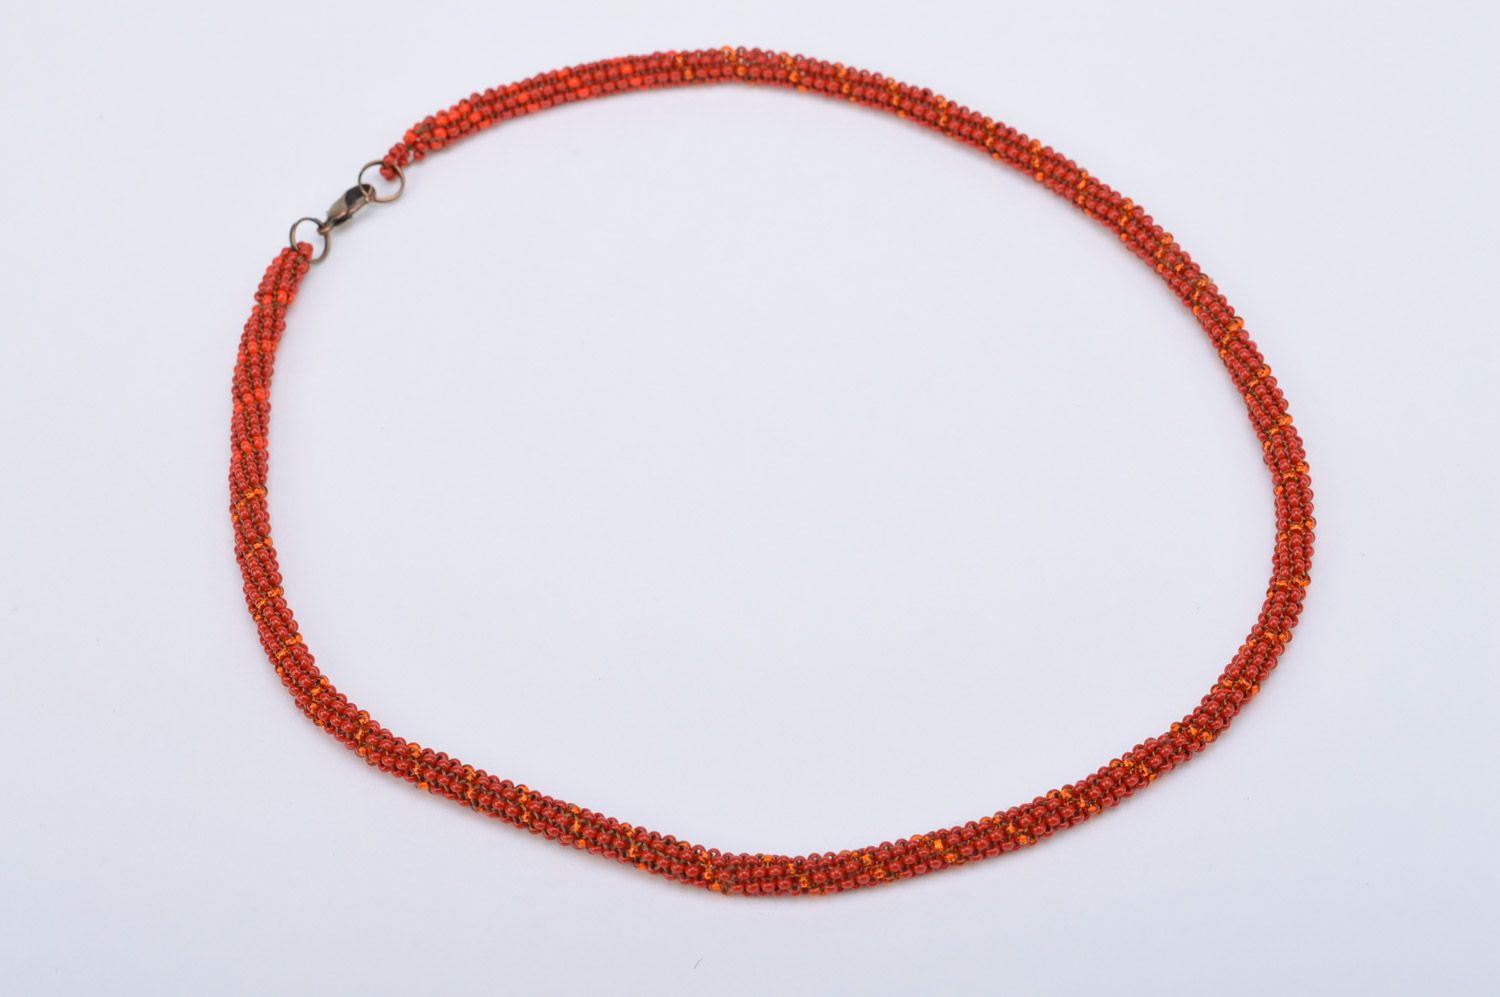 Handmade beaded red cord necklace for women author's work adornment photo 2